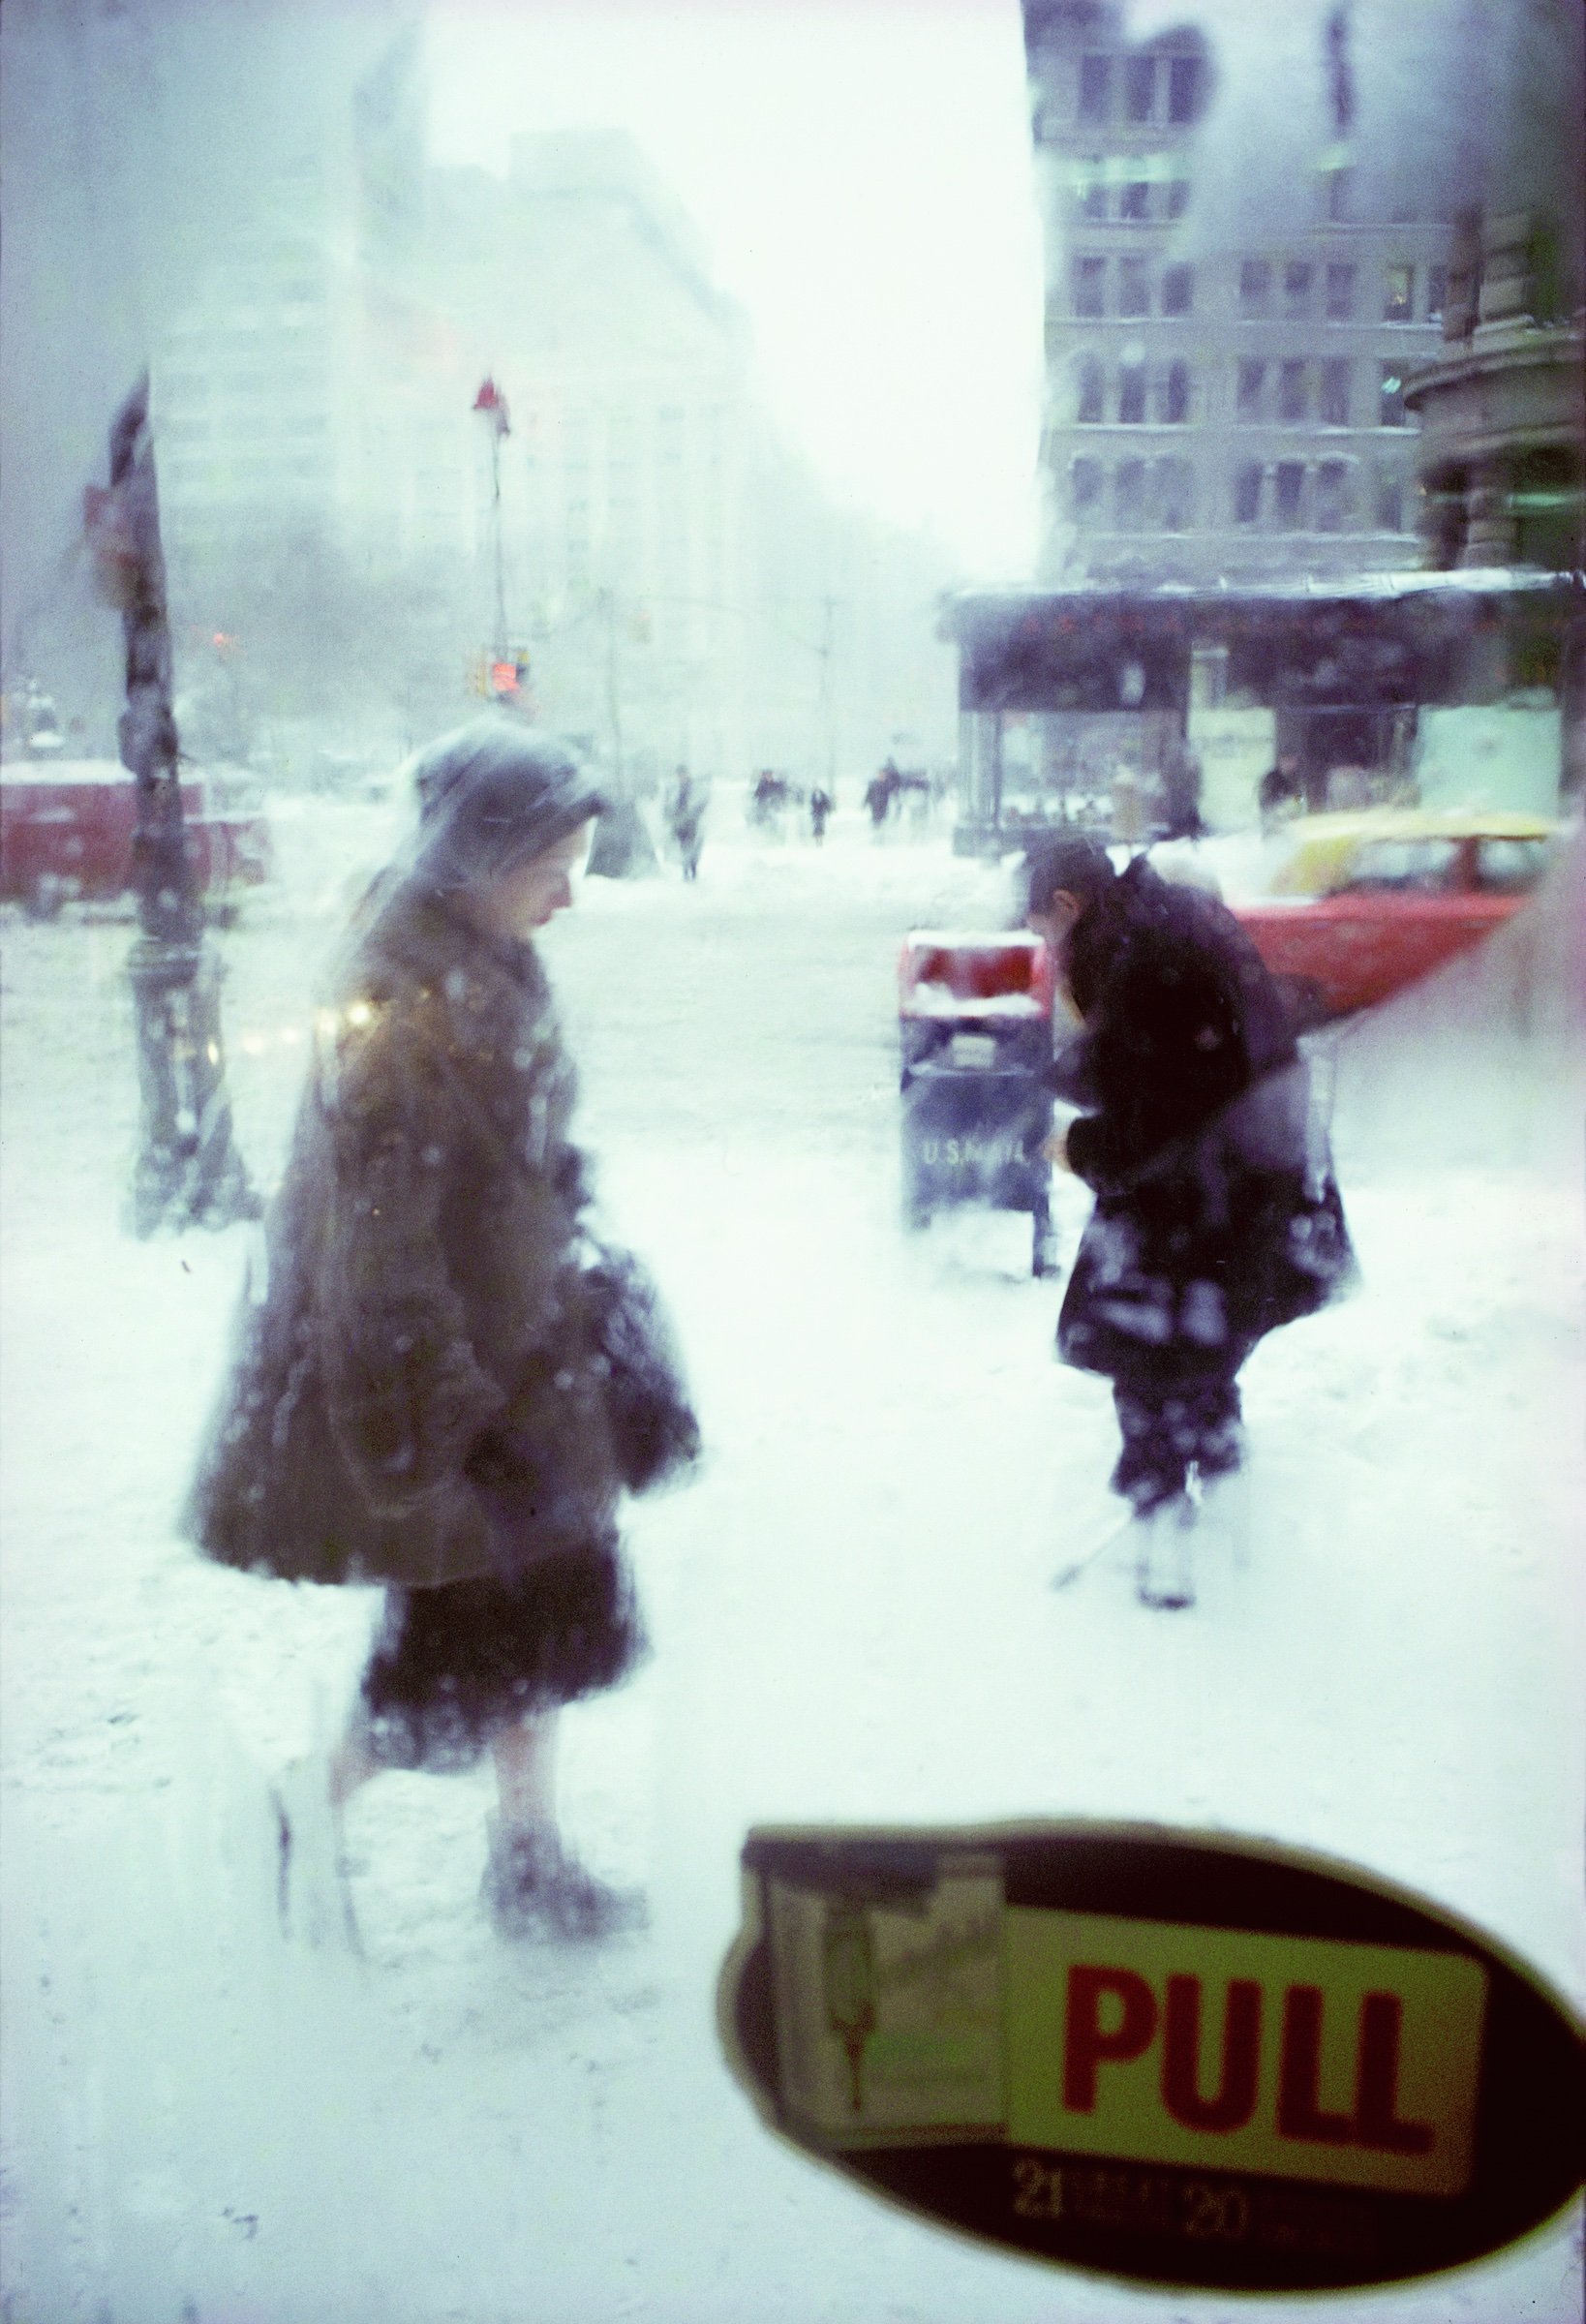 Saul Leiter: An Unfinished World